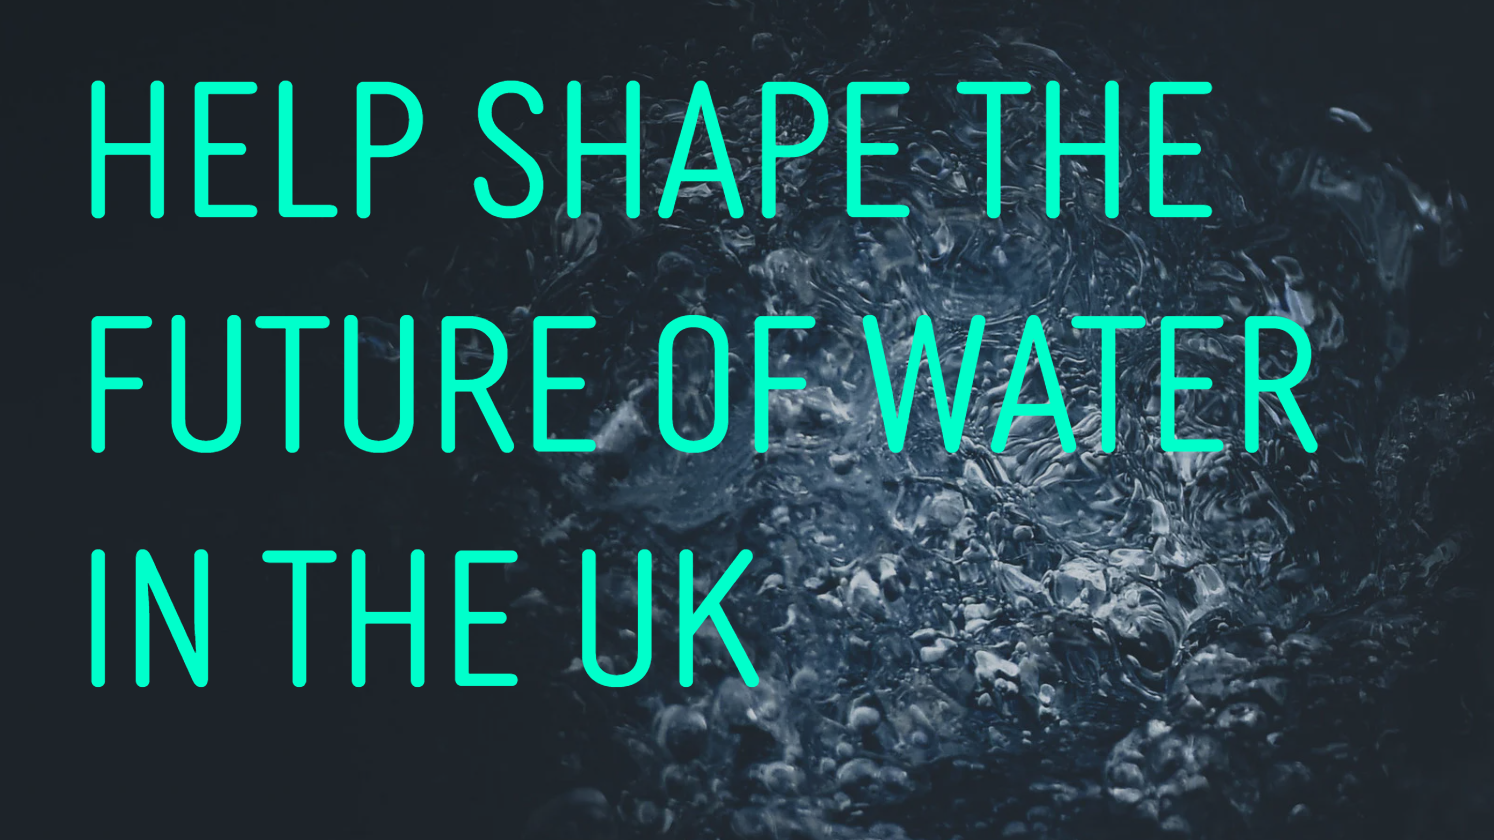 Graphic stating: "Help shape the future of water in the UK"